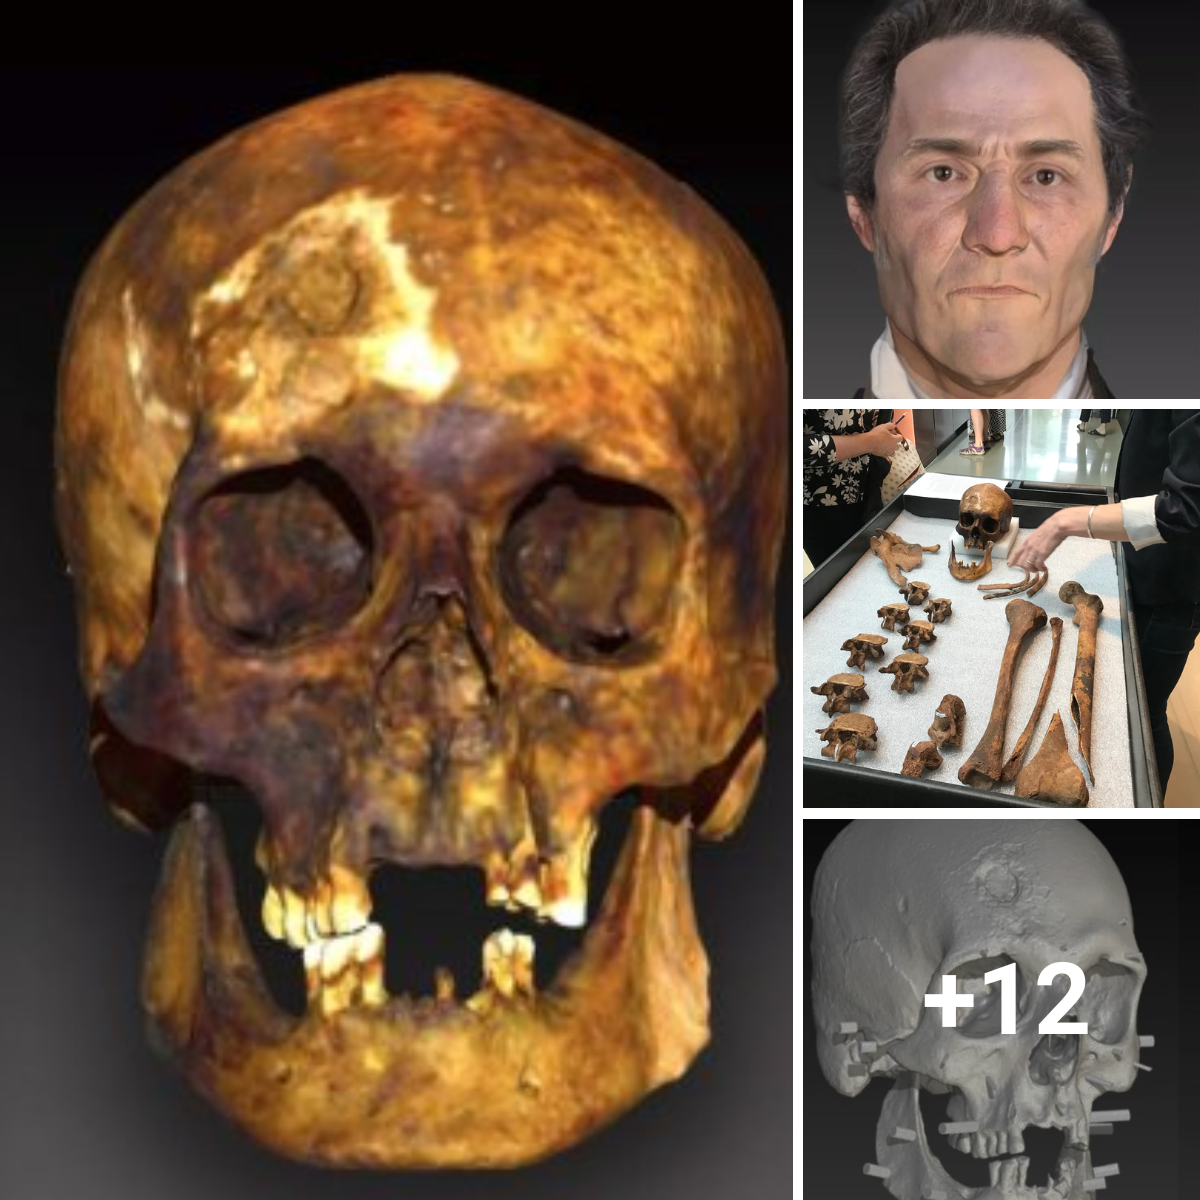 DNA Reconstruction of the Face of an Eighteenth-Century “Vampire” Buried in an Odd Way to Prevent Him From Attacking the Living